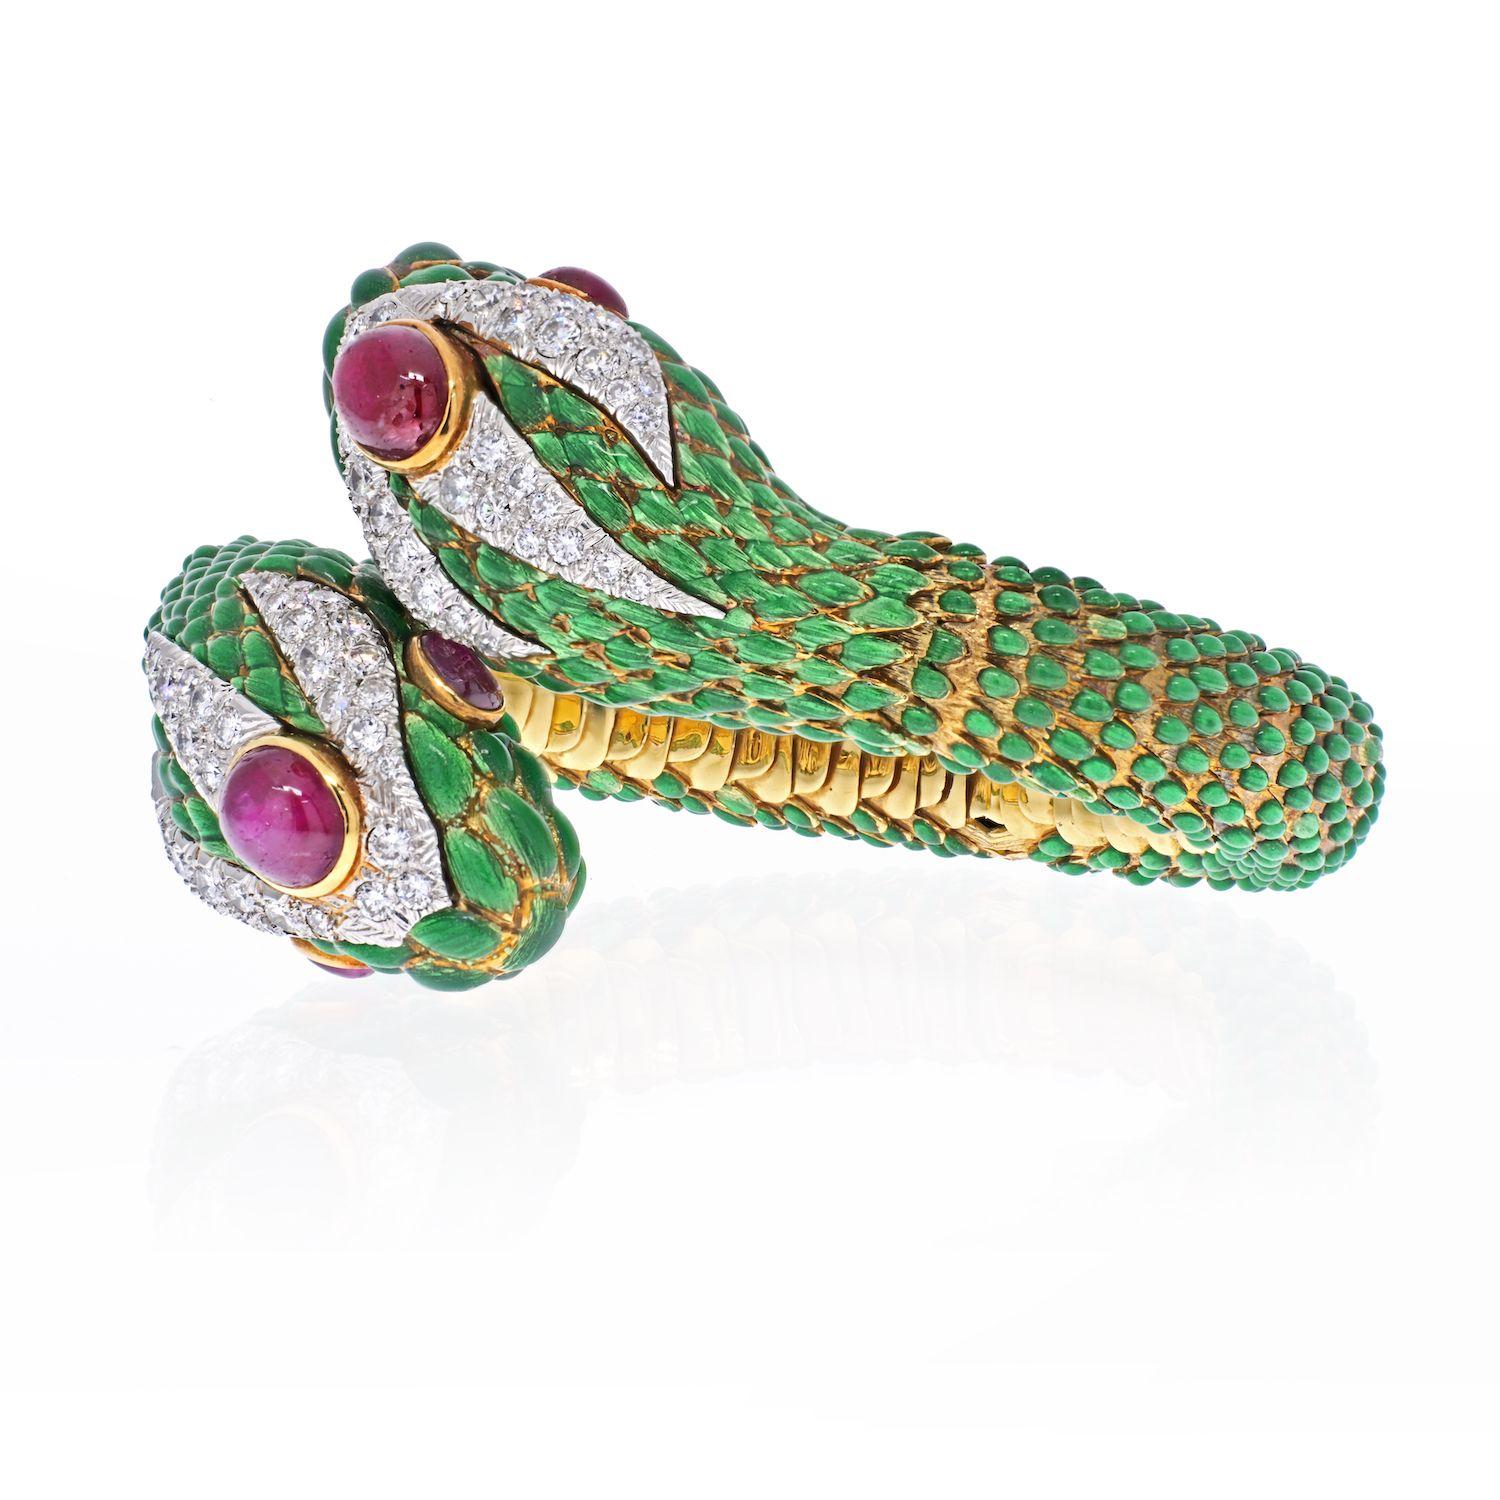 David Webb crossover bangle, designed as a green enamel double-headed snake, each with cabochon ruby eyes, accented by a circular-cut pavé-set diamonds, mounted in platinum and 18k gold. 
Wrist size 8 to 8.5 inches. Some wear to enamel. 
